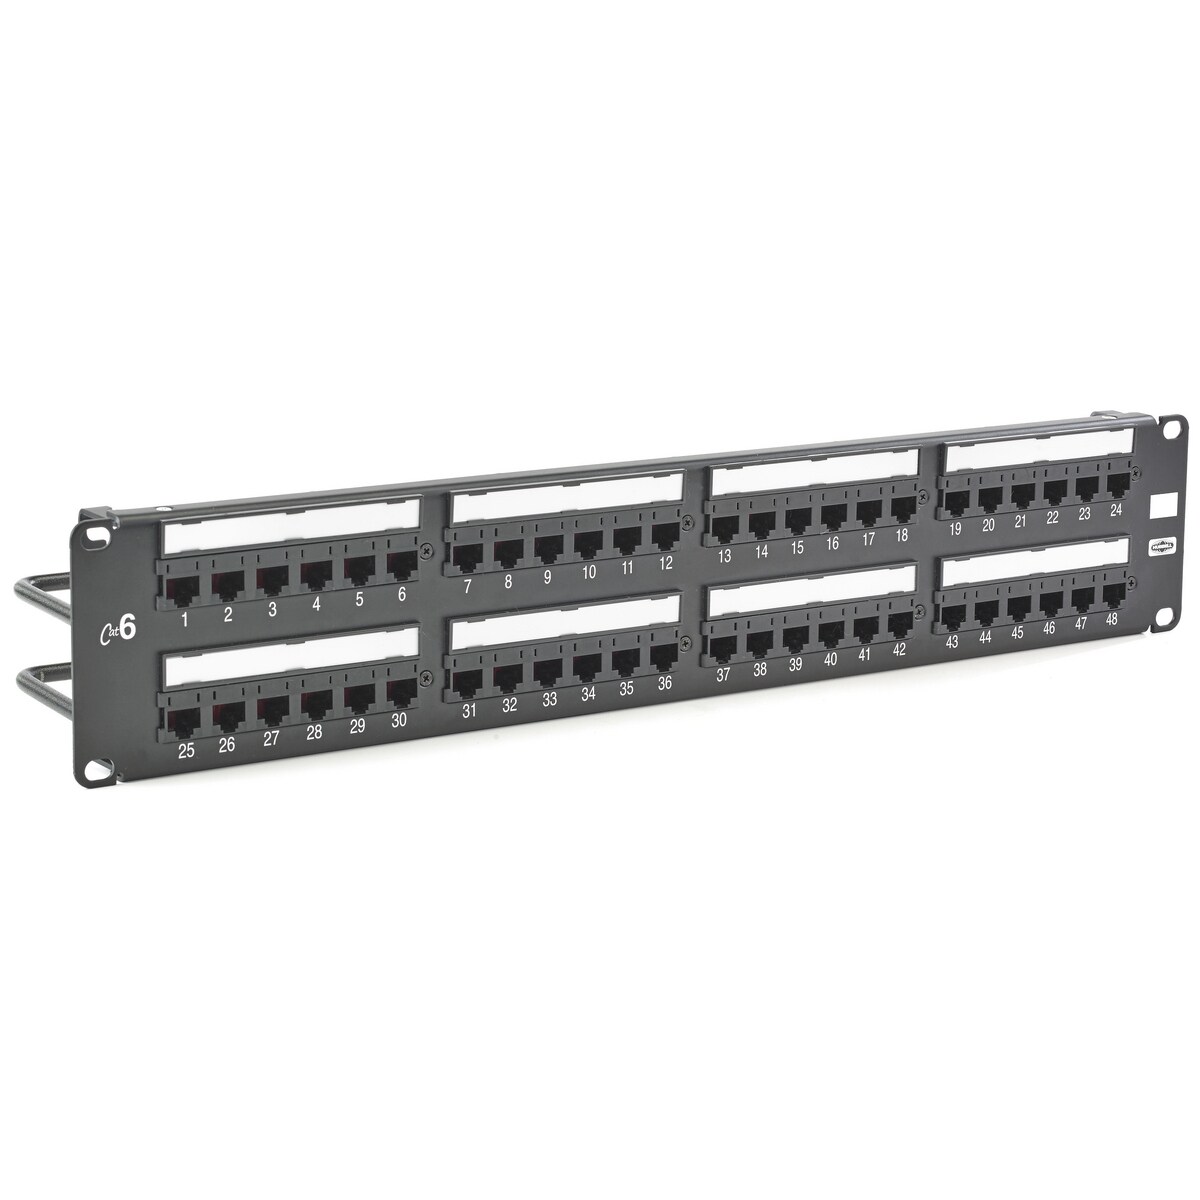 Hubbell NEXTSPEED patch panel with cable management - 2U - 19"